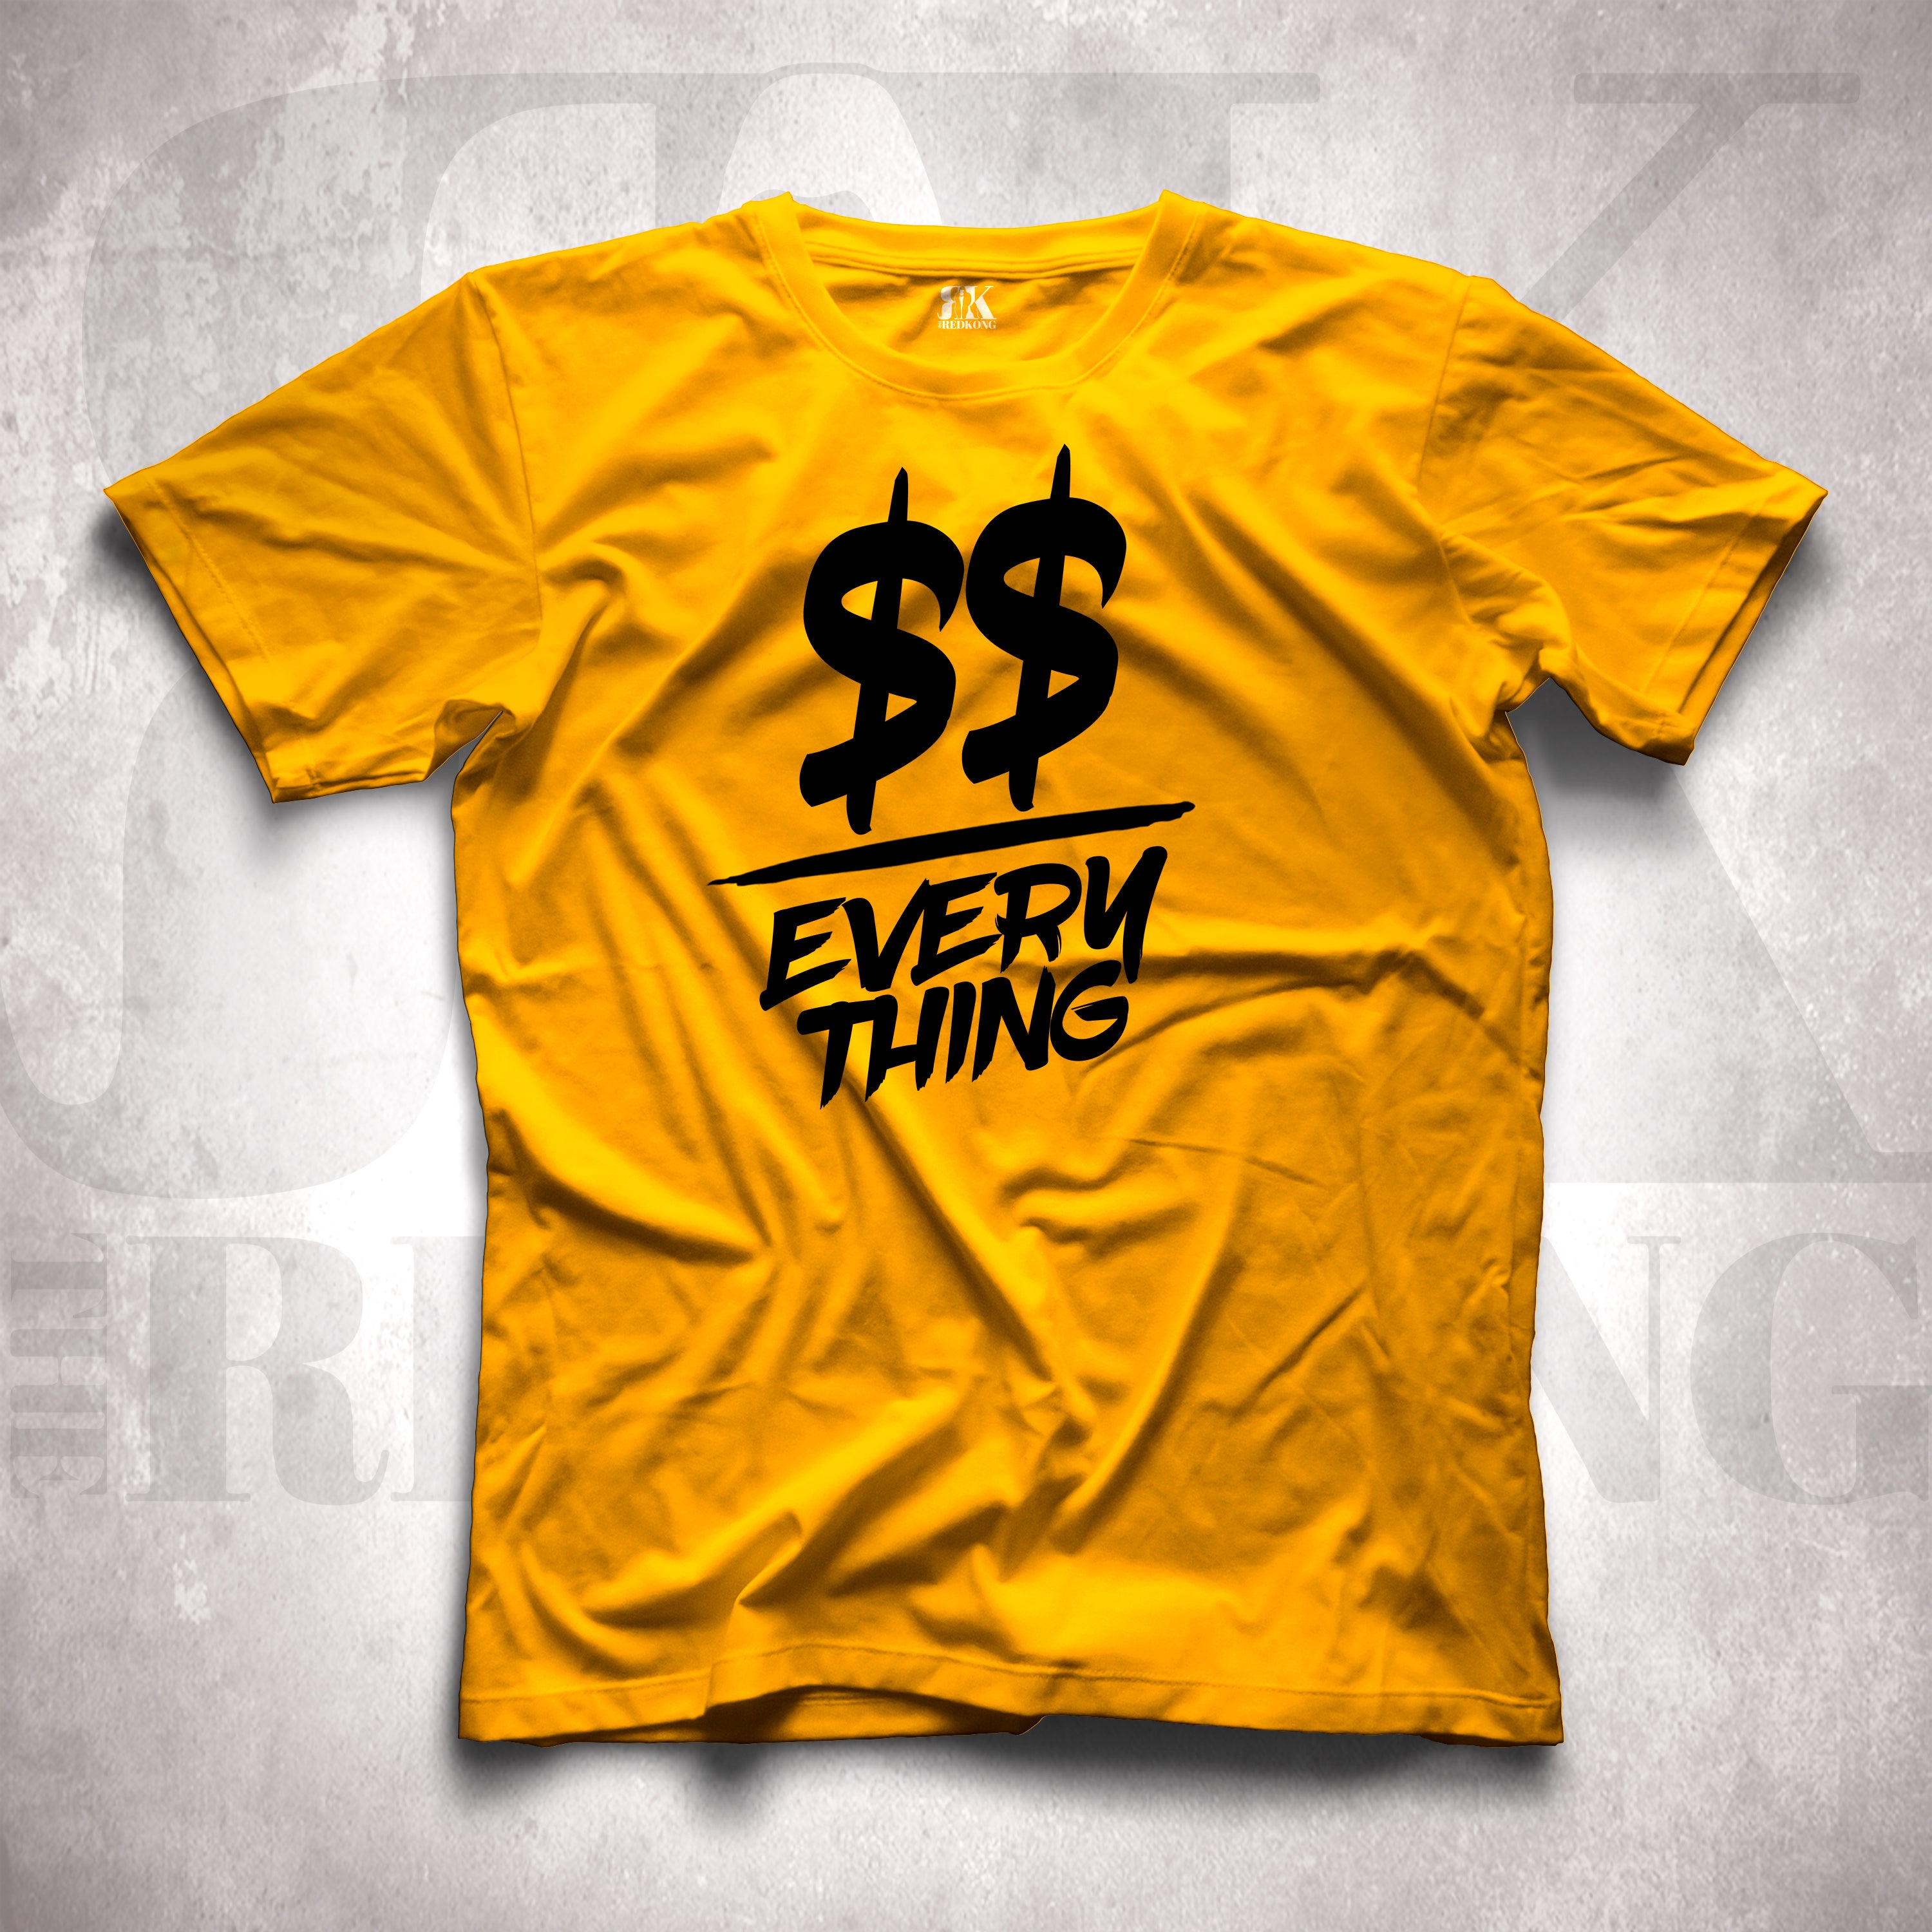 Money Over Everything: A Hustlers Motto (Black Logo)